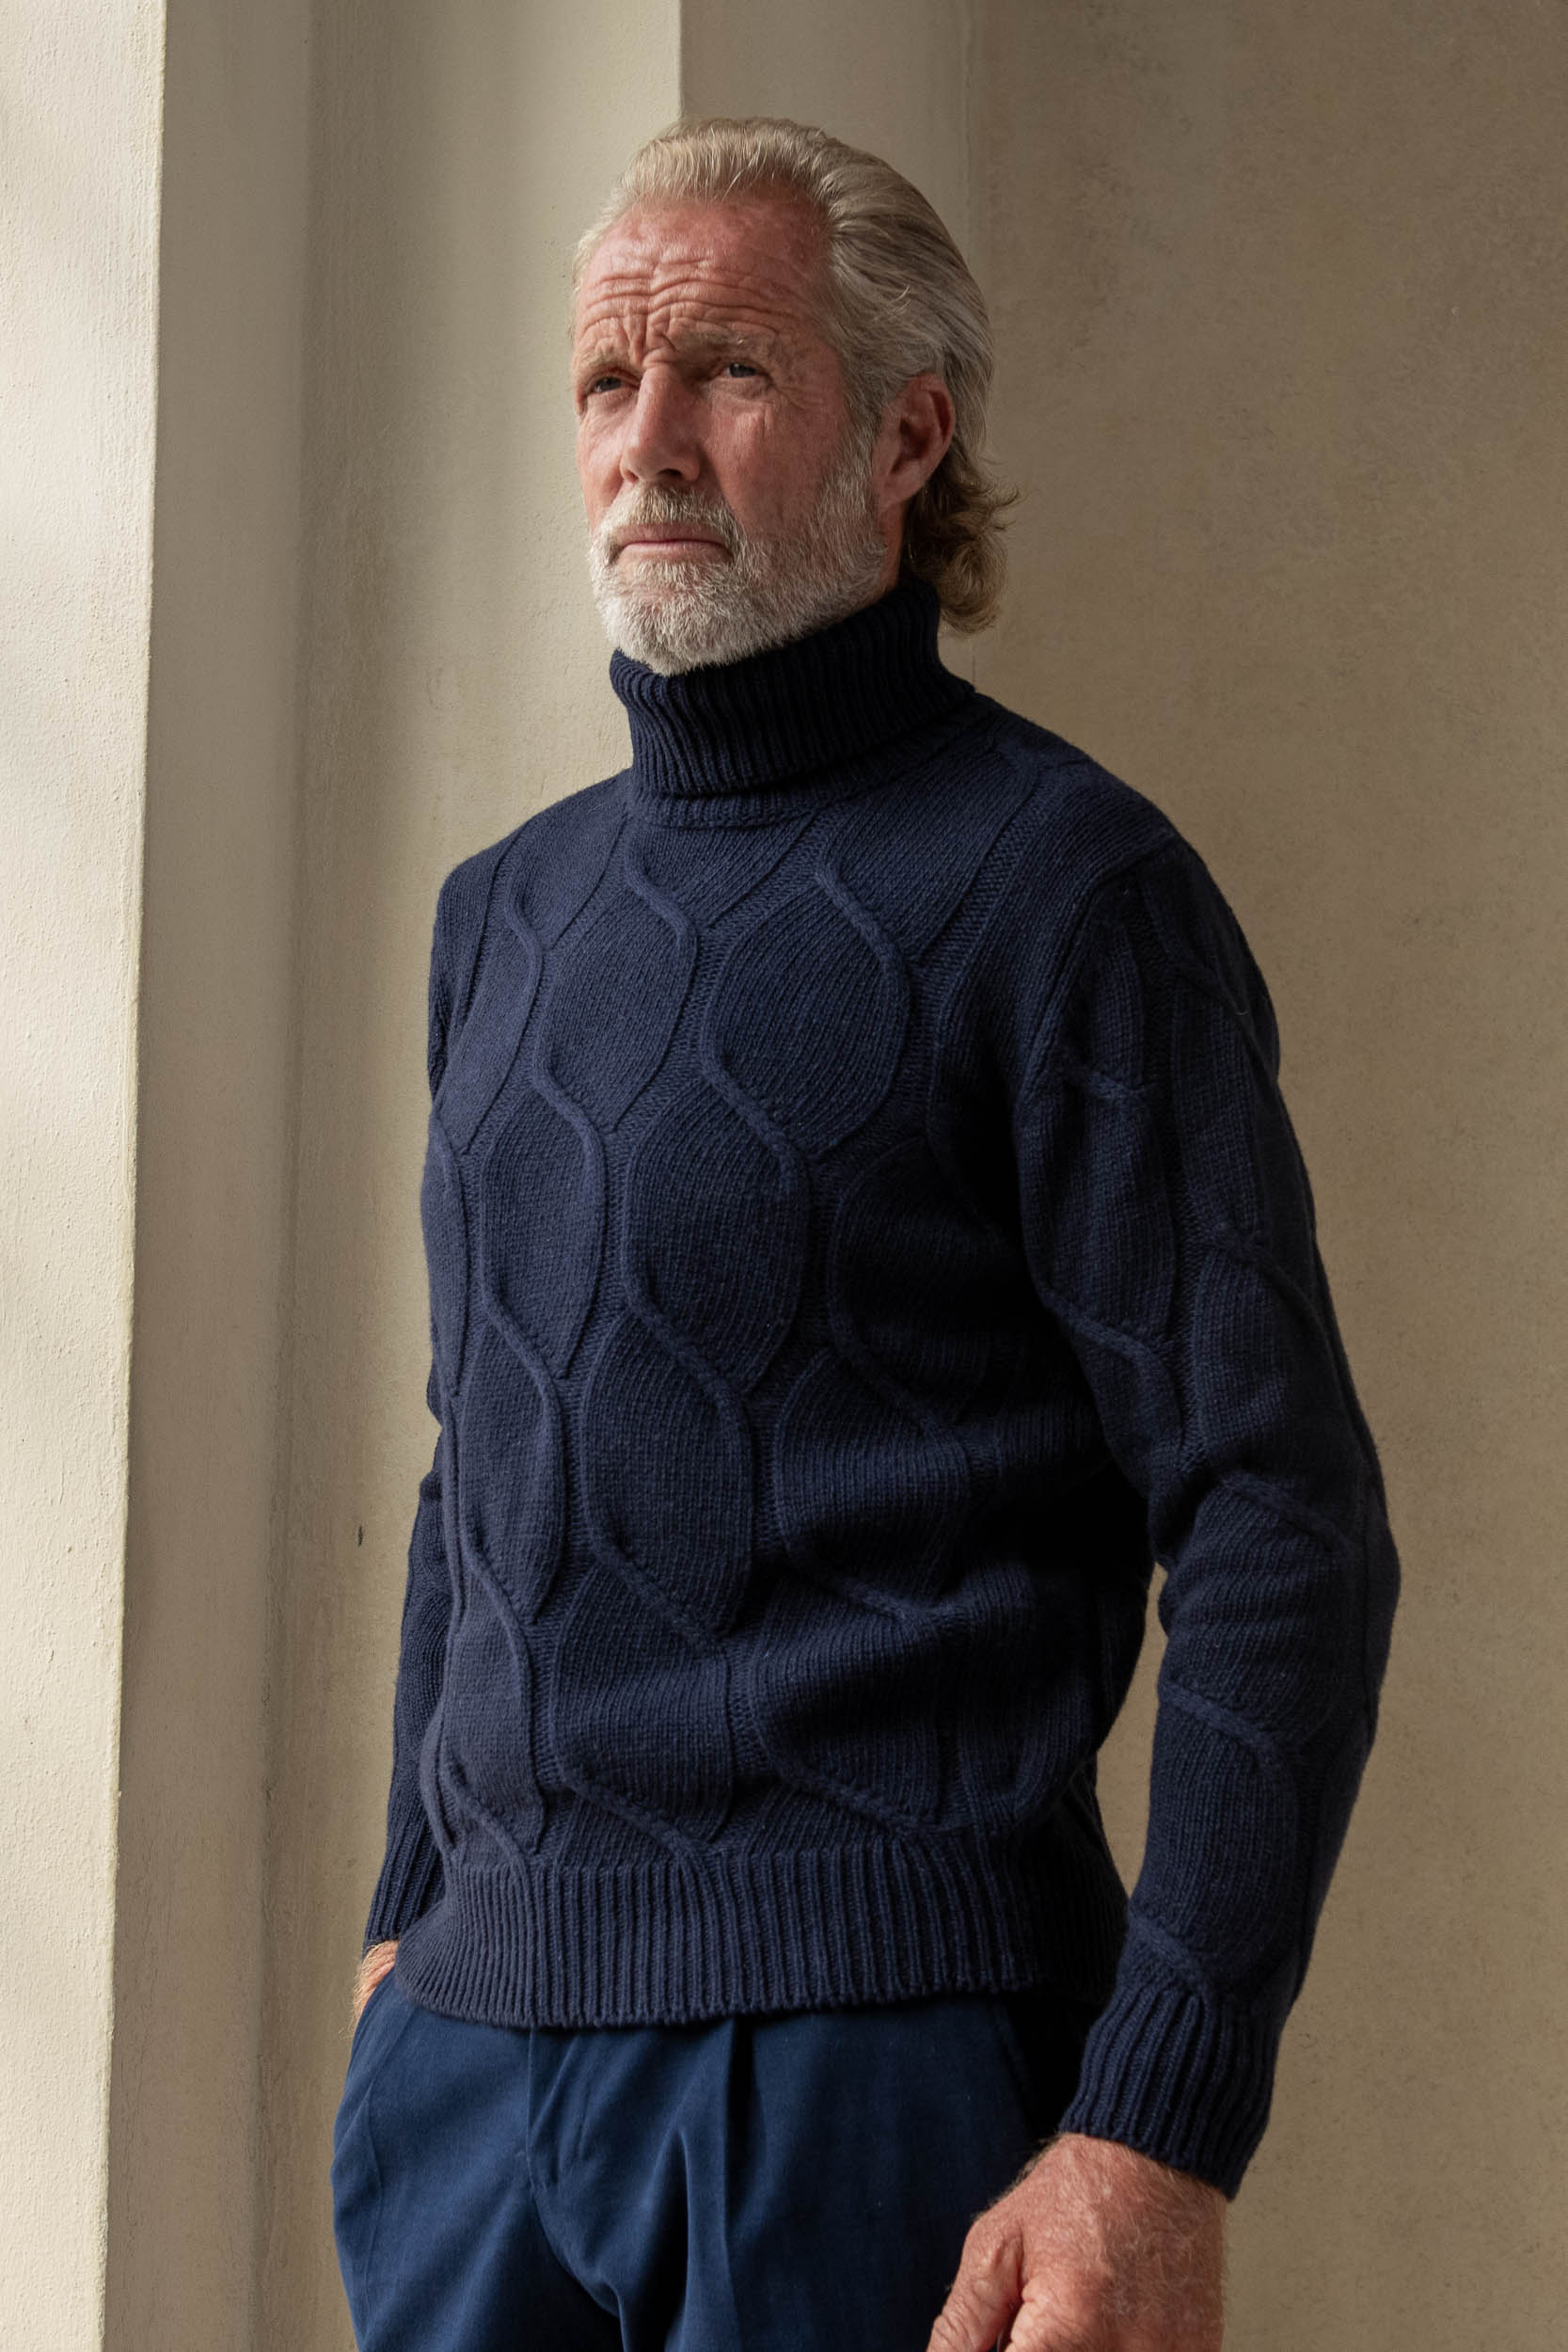 Blue jacquard pattern cashmere blend turtleneck, Made in Italy